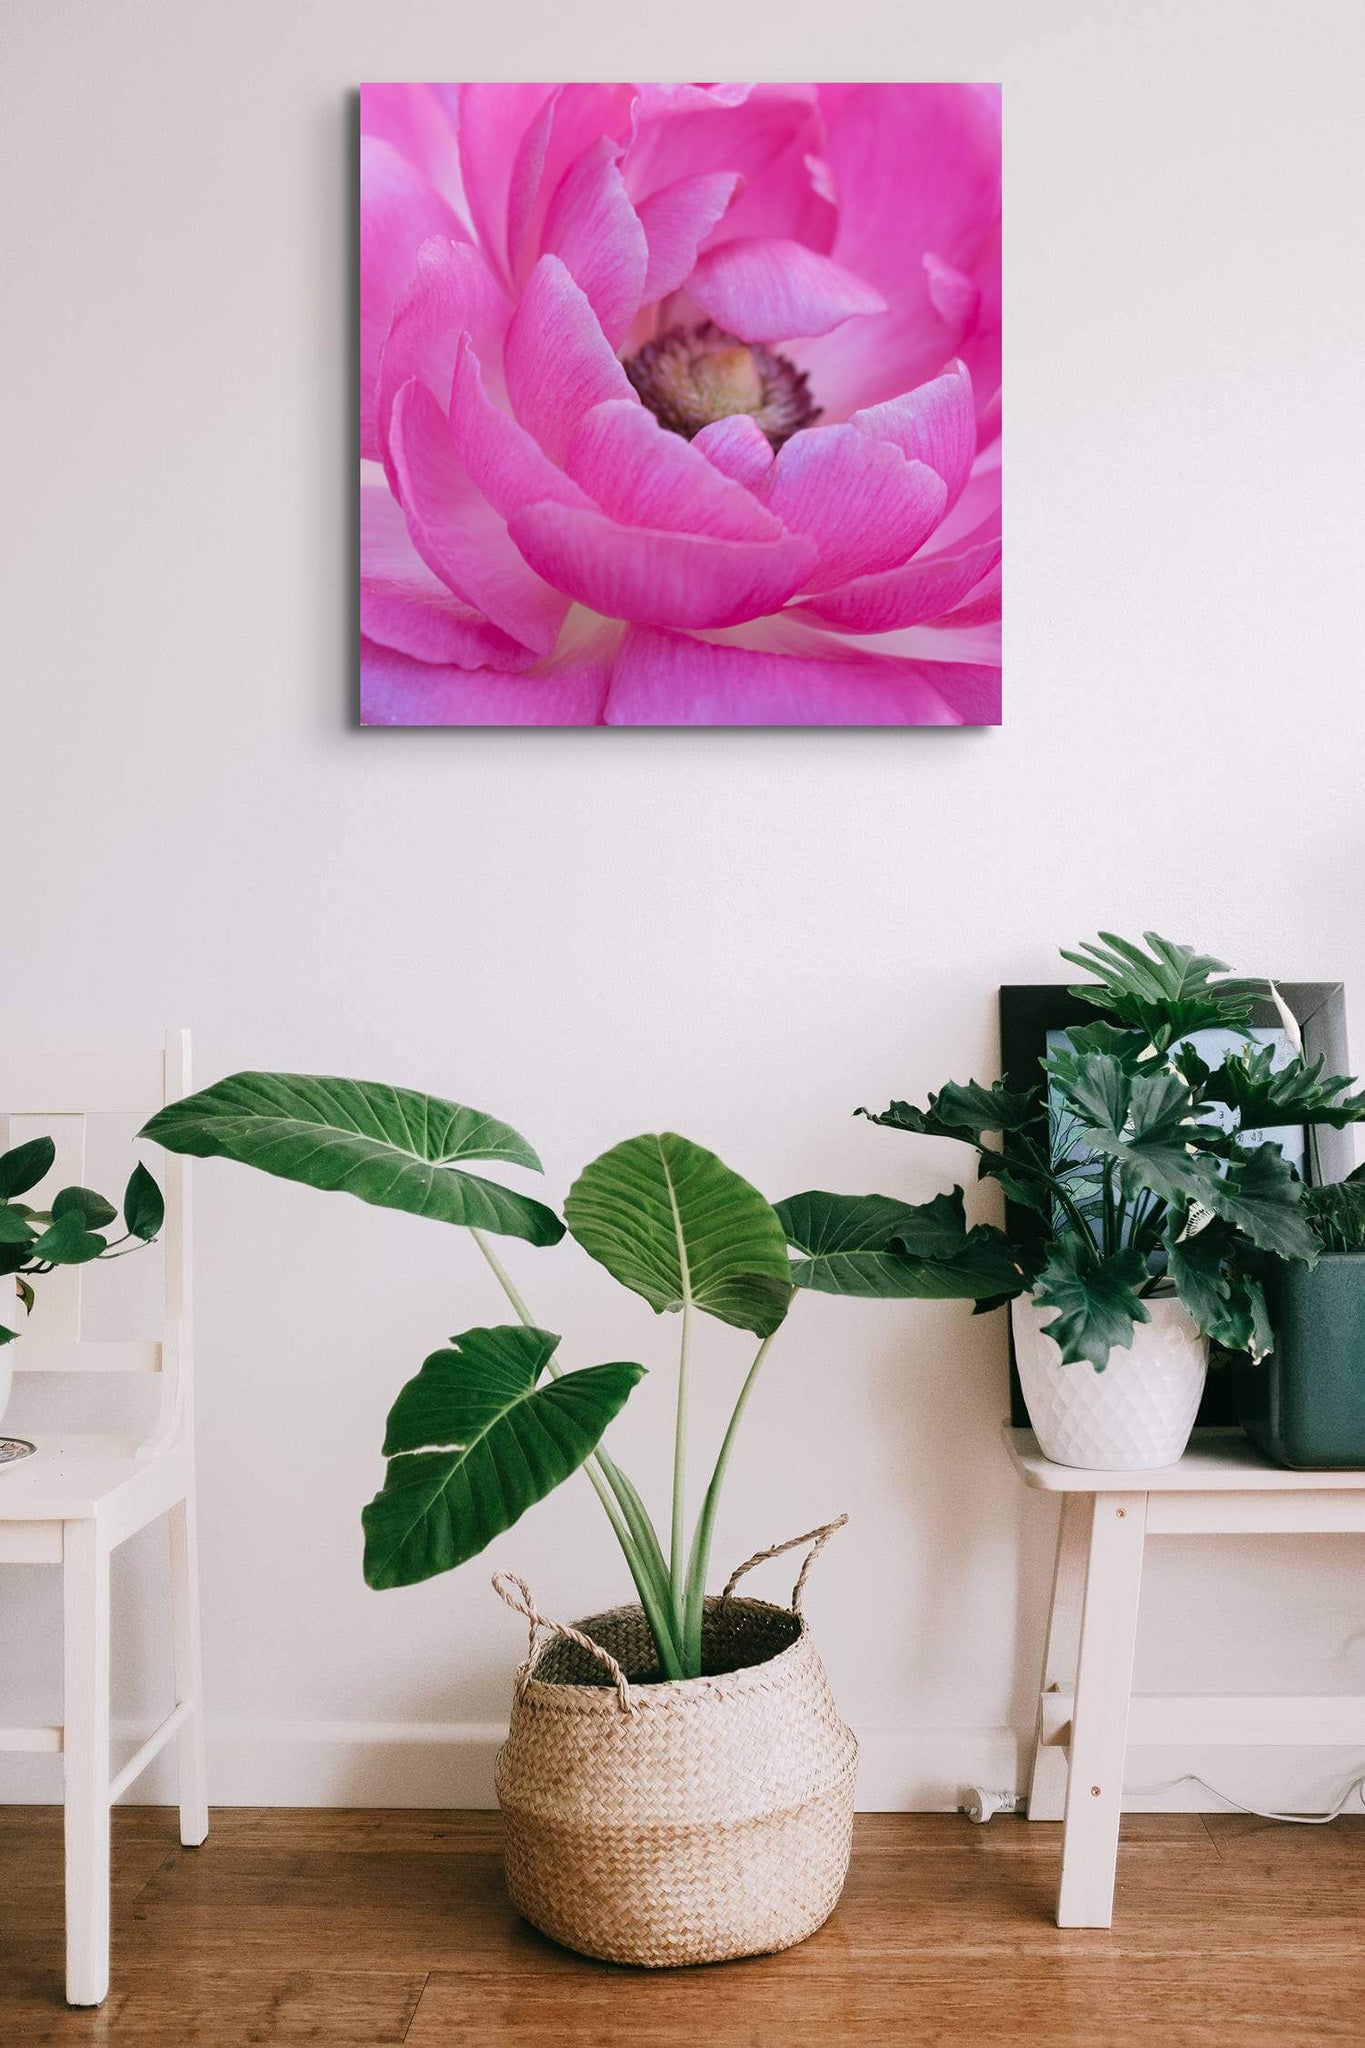 Picture hanging on a wall with a room full of potted plants. The picture on the wall is a fine art macro photograph of a pink ranunculus flower by Cameron Dreaux. 